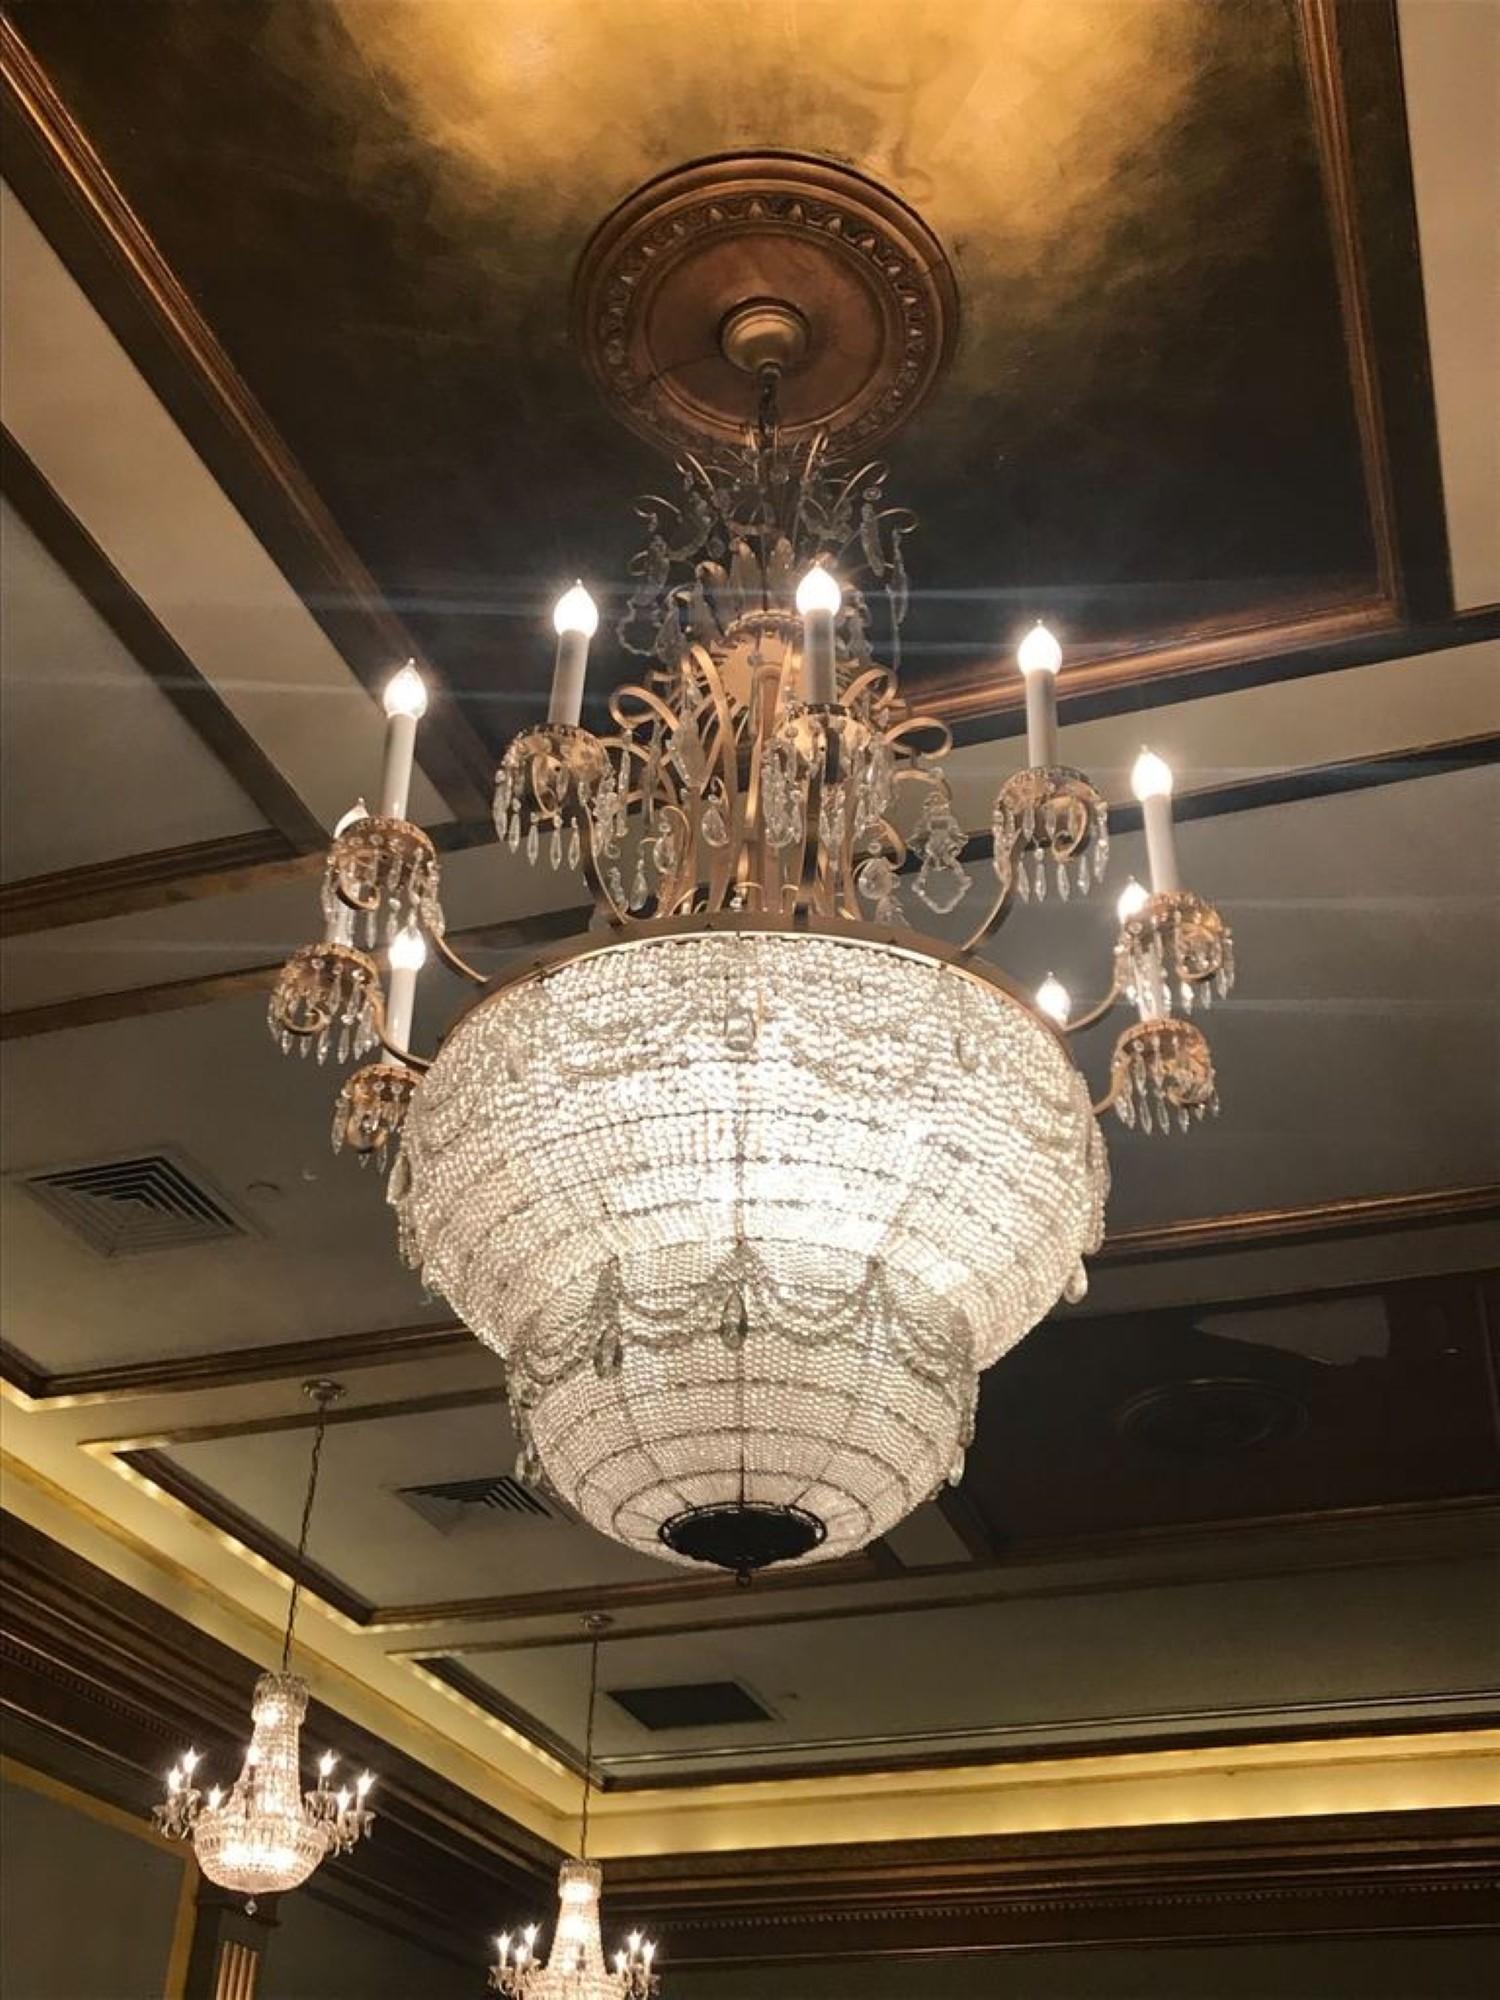 Impressive large scale crystal basket chandelier from the 1930s. There are 12 candlestick arms outside and 18 bulbs on the interior, with 30 lights total. Form The Palace Theater in Manhattan. Small quantity available at time of posting. Please